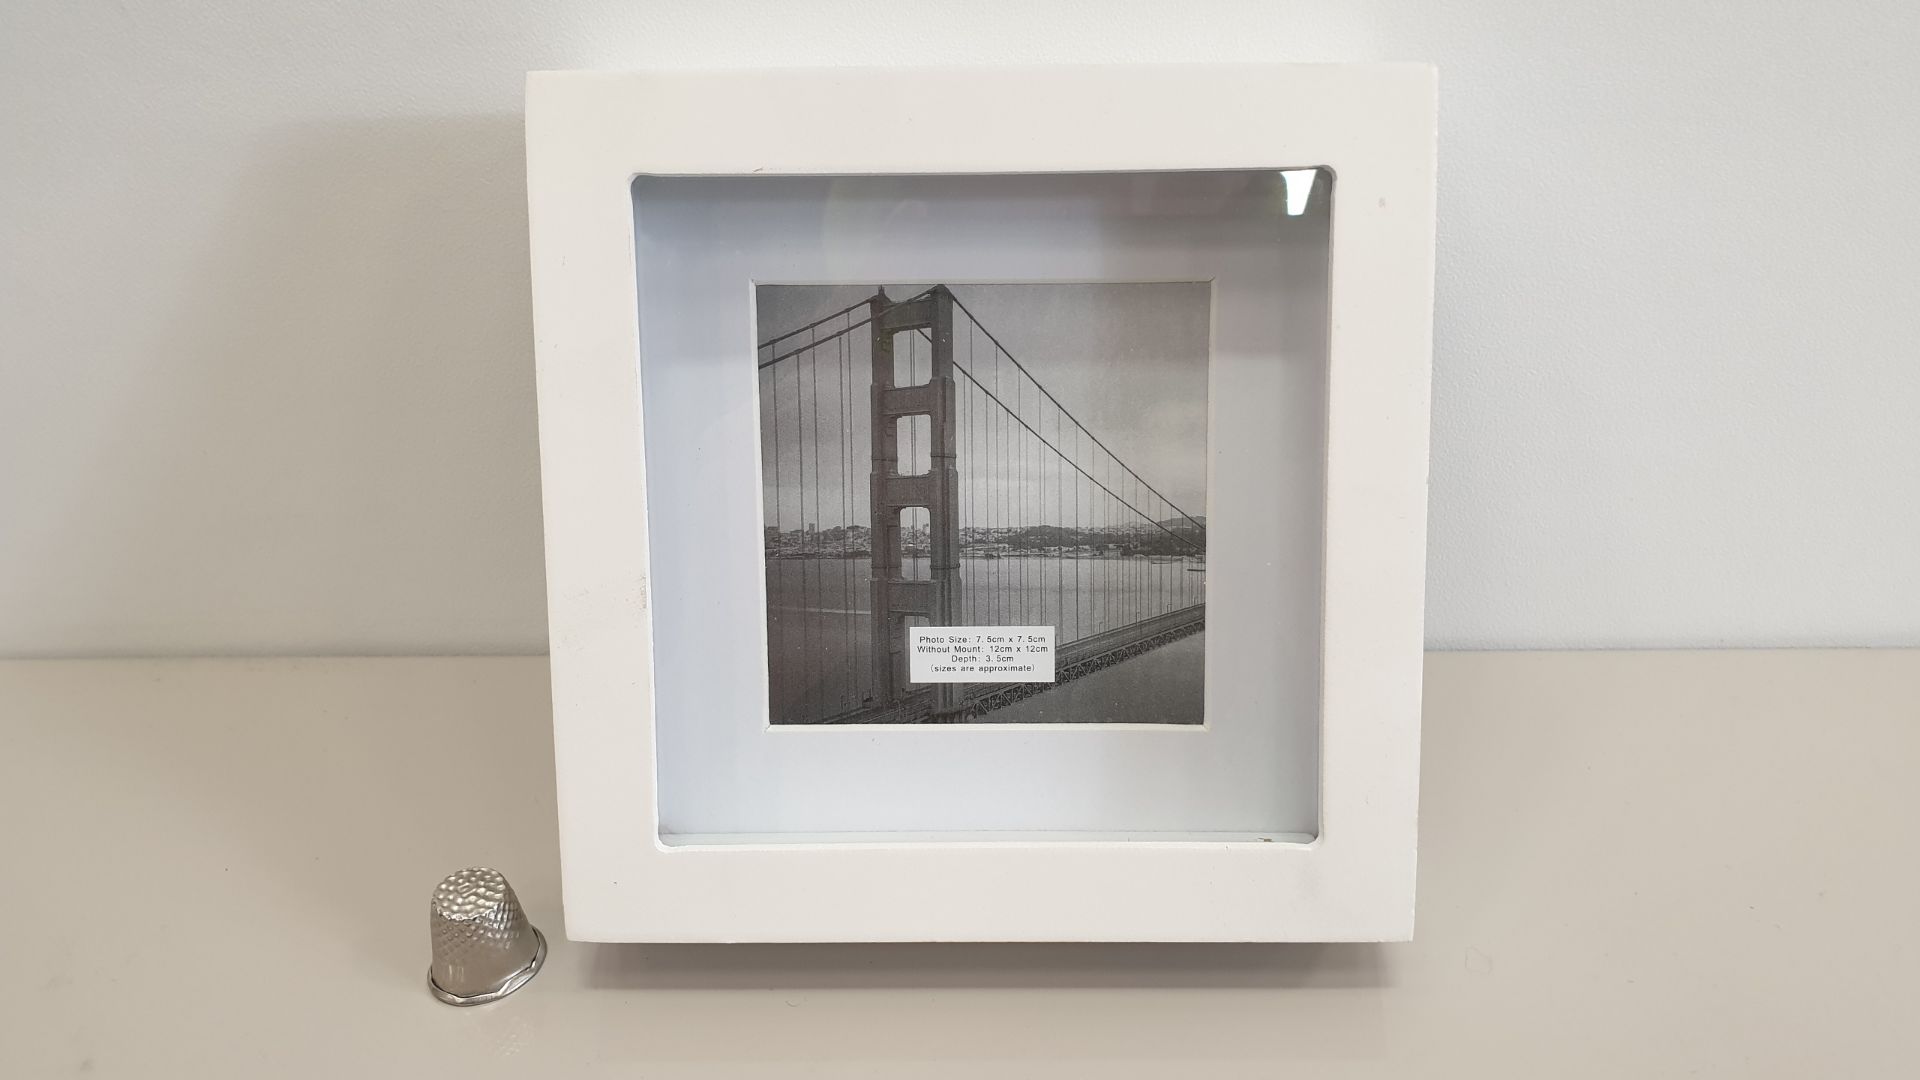 36 X SHADOW BOX FRAME PICTURES (12 X 12CM WITHOUT MOUNT) - IN 1 CARTON